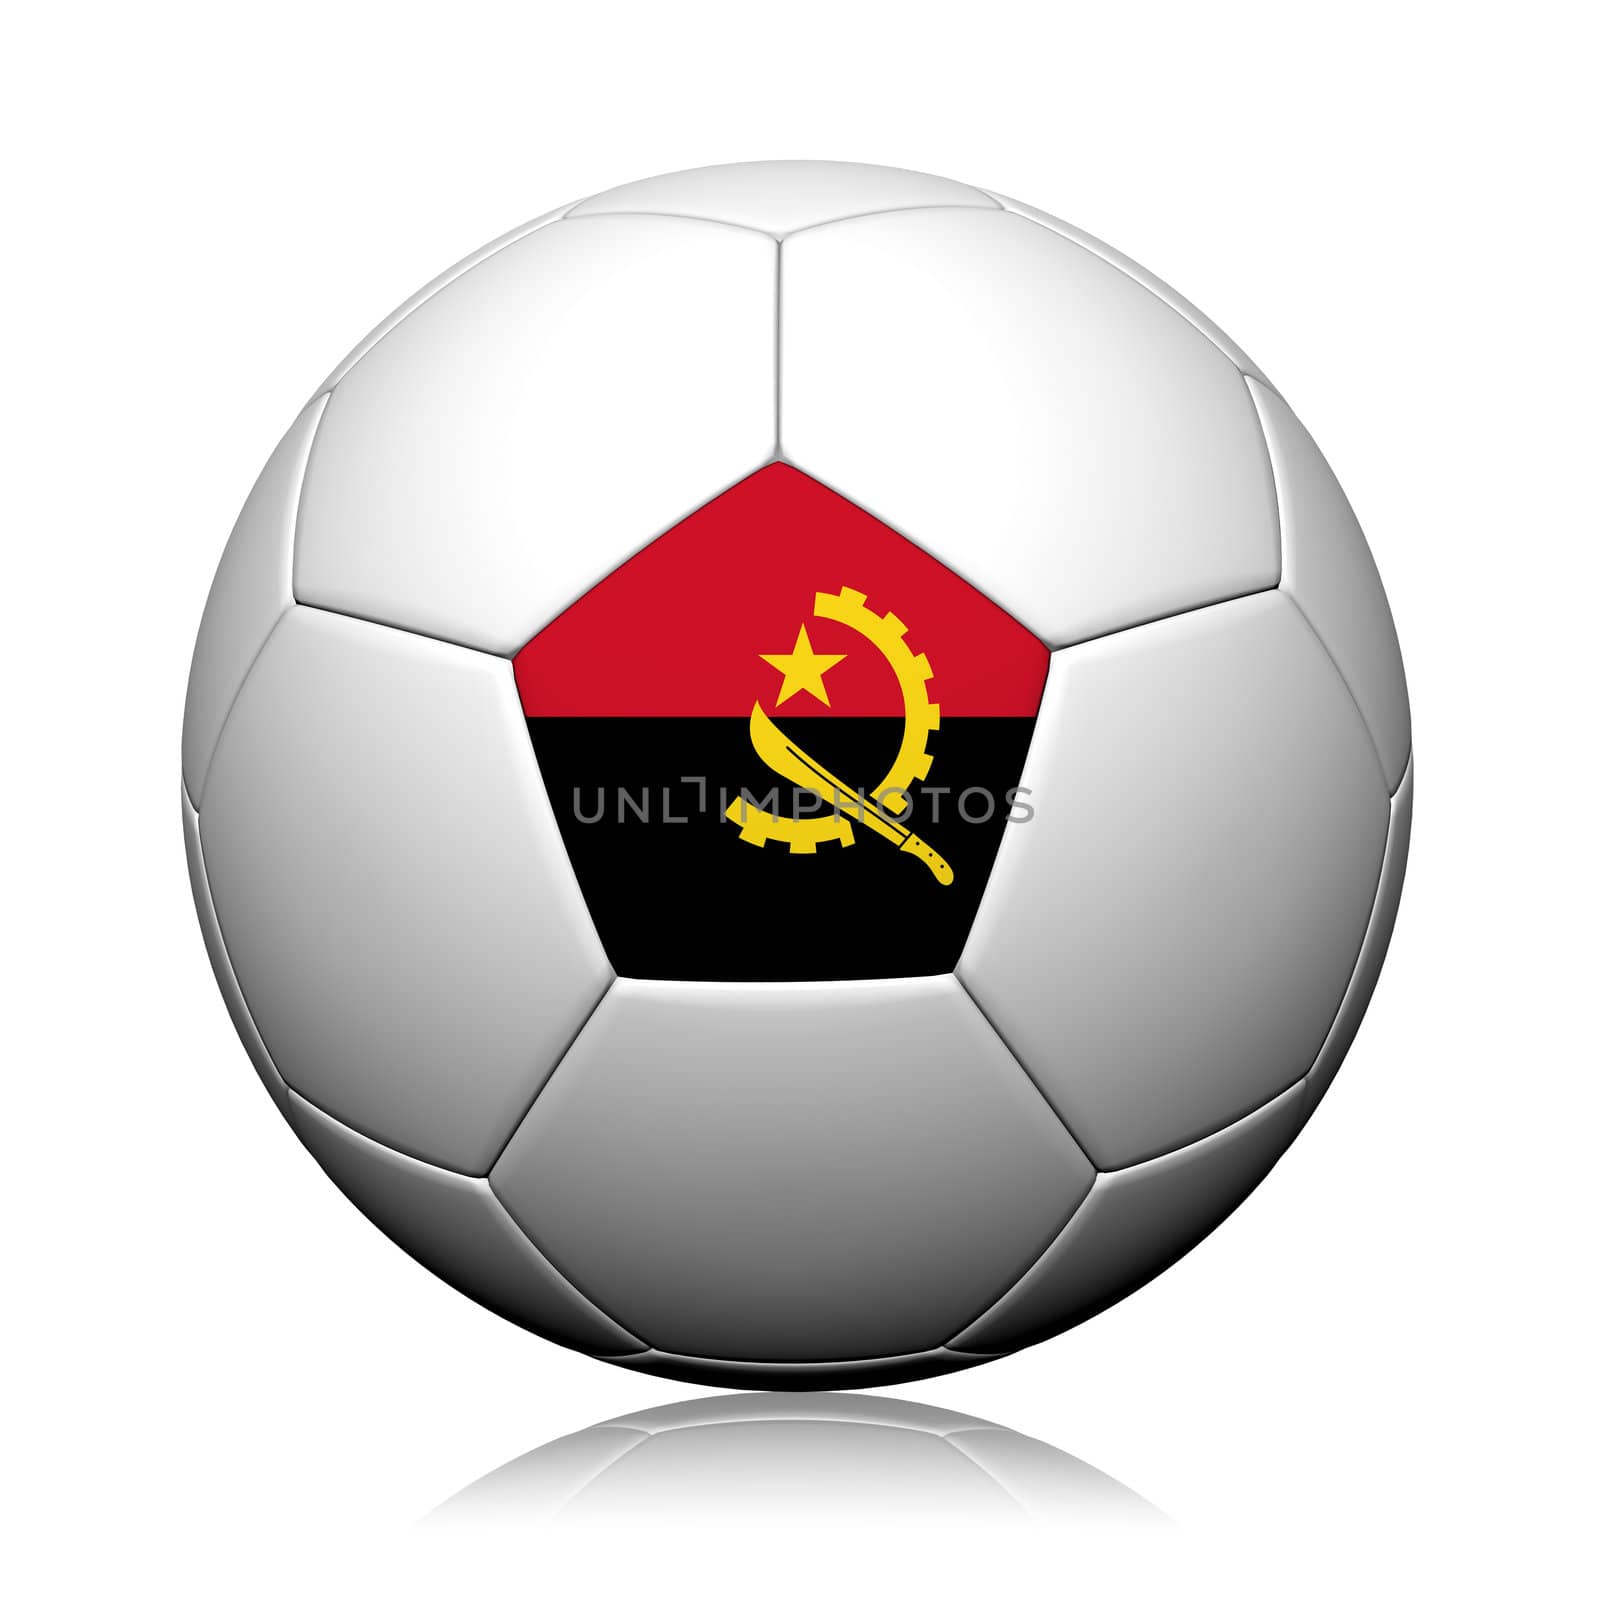 Angola Flag Pattern 3d rendering of a soccer ball